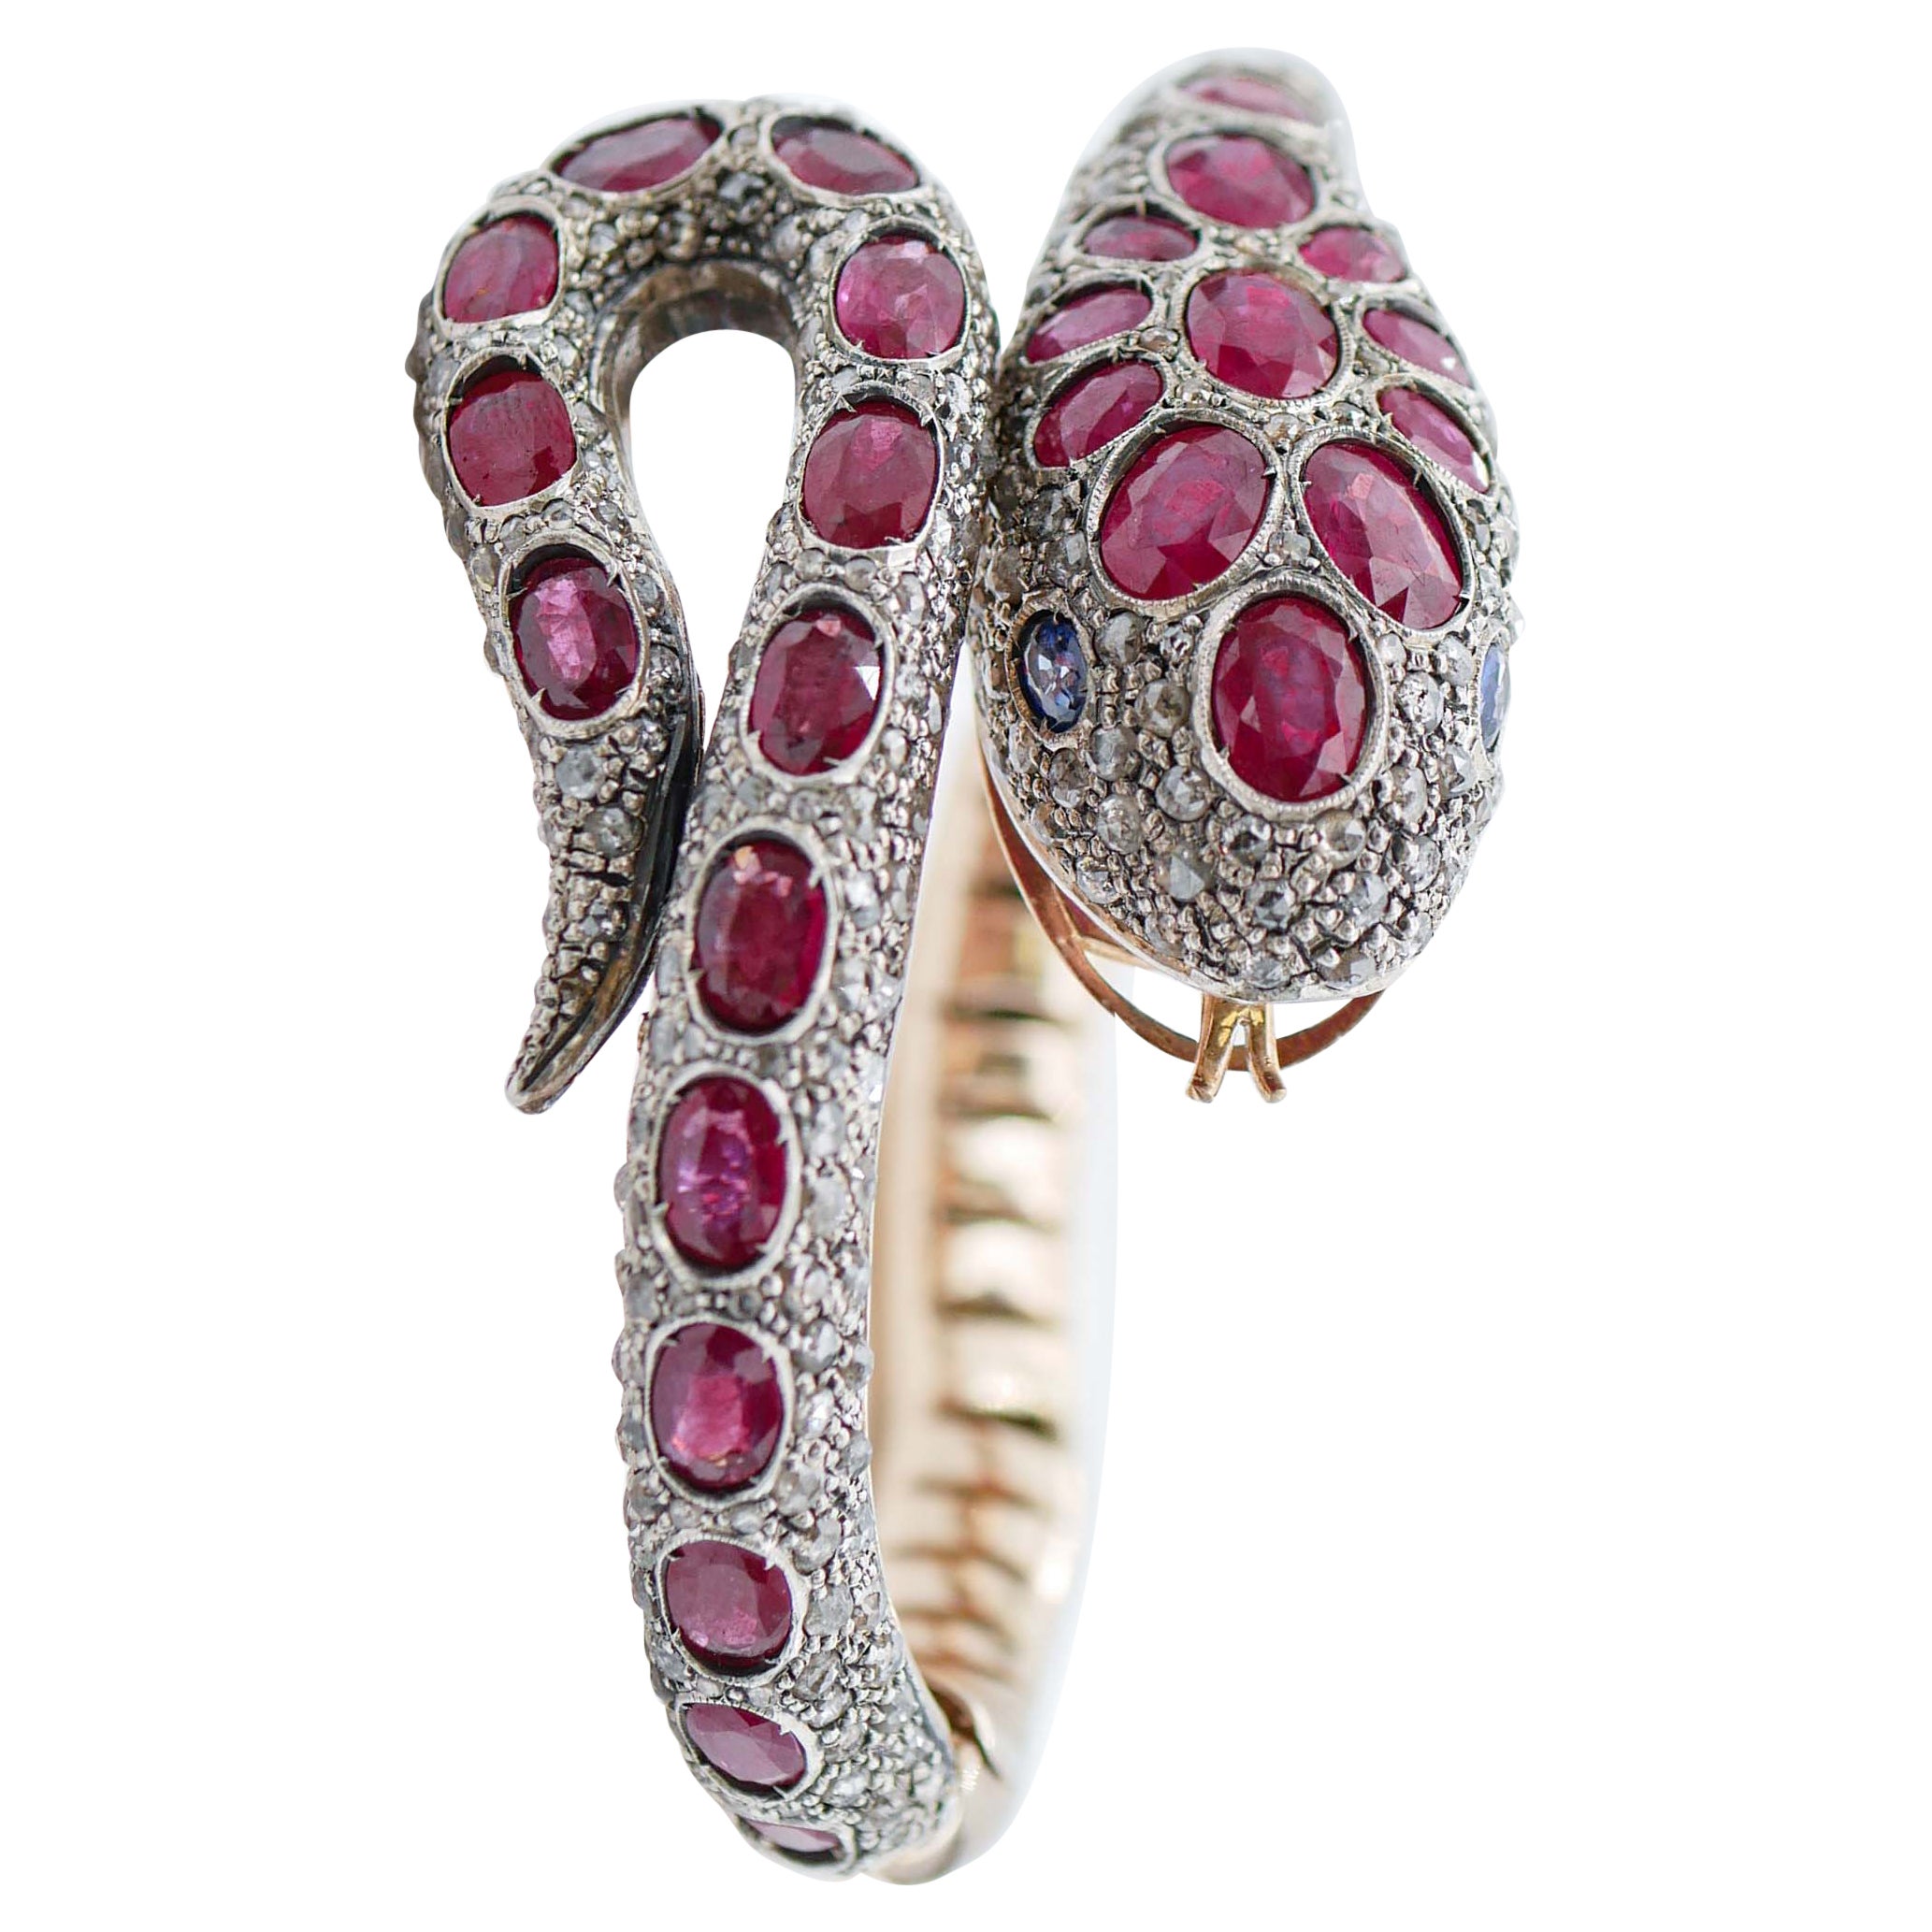 Rubies, Diamonds, Rose Gold and Silver Snake Bracelet For Sale